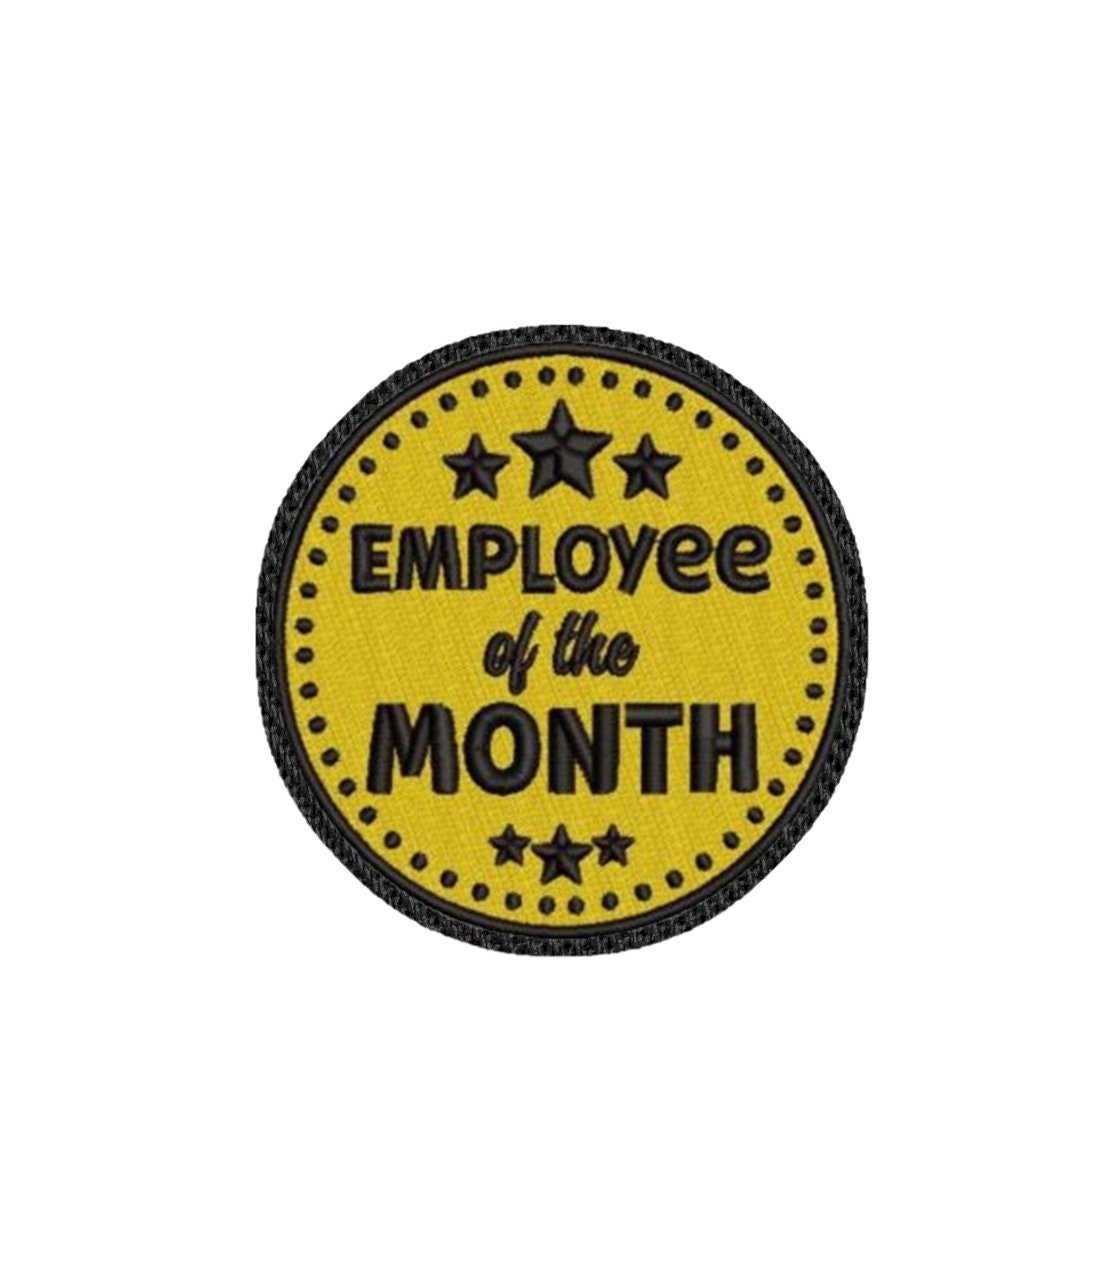 Employee of the Month Badge Iron on Patch / Sew on embroidered patches - Work Occupation Embroidery Women Applique Merit for Clothing Jacket